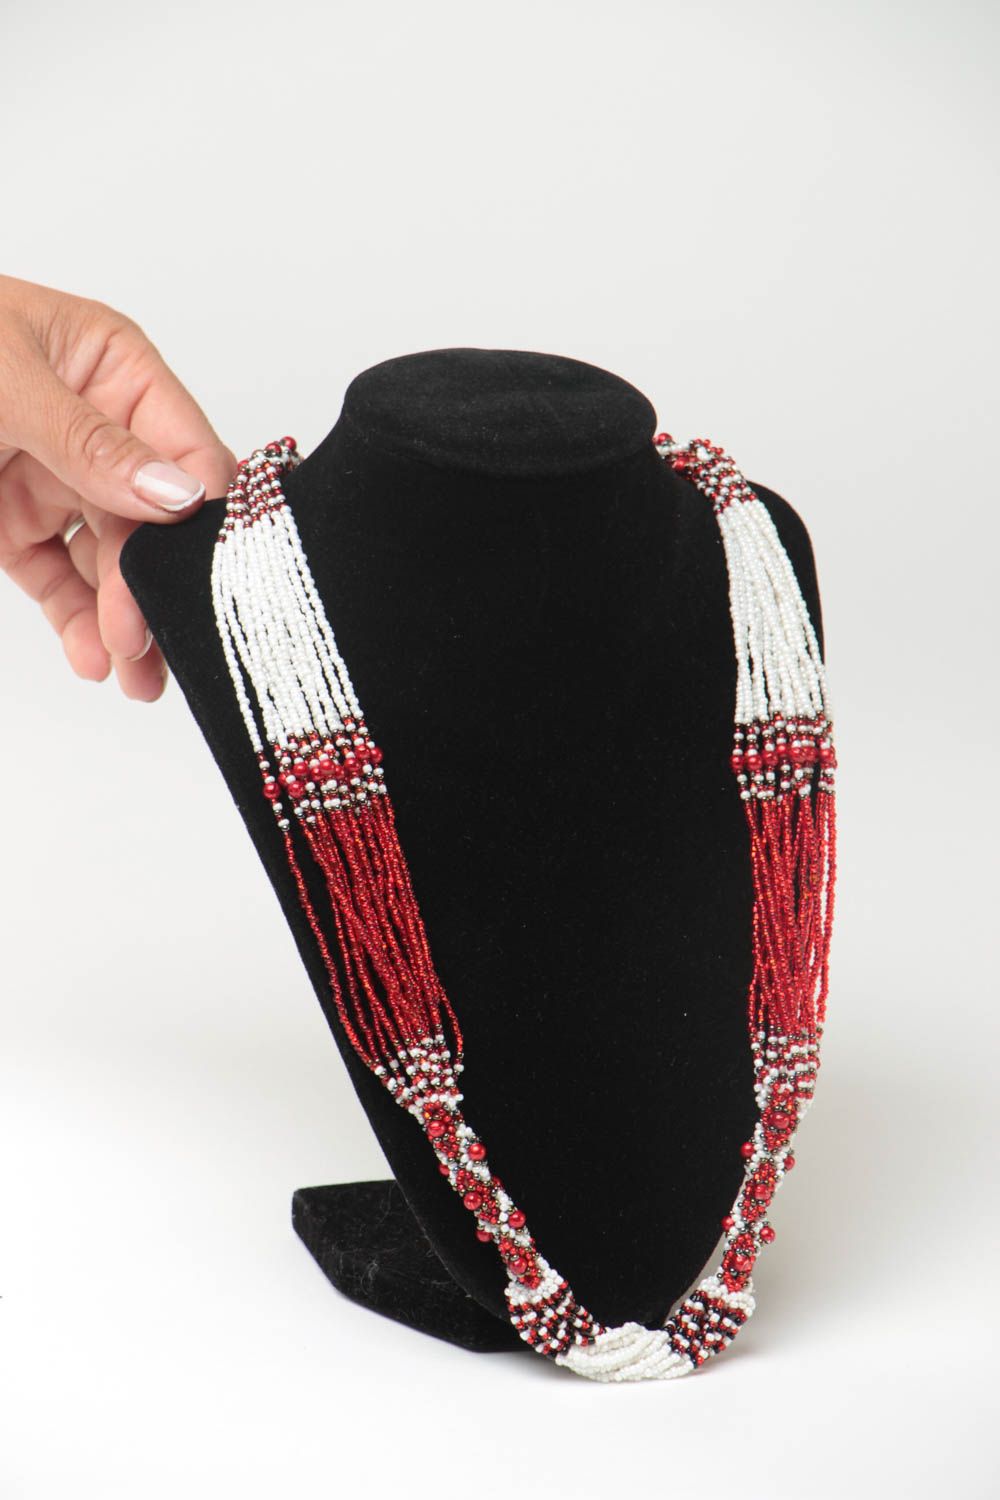 Red and white handmade long beaded necklace stylish gerdan for women photo 5